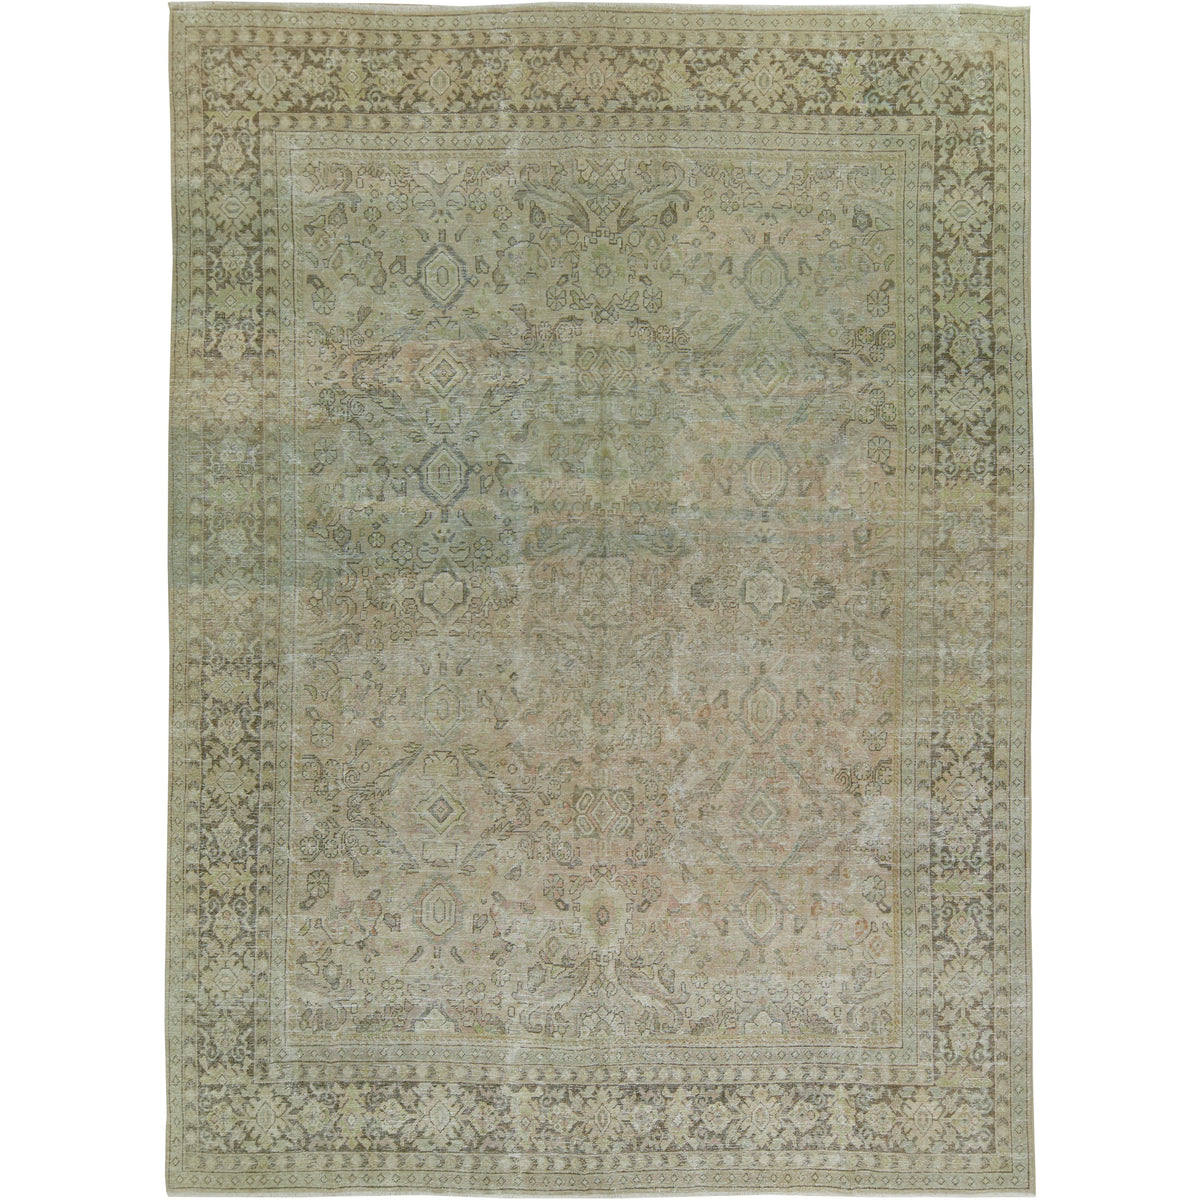 Narcissa | A Symphony of Style and Tradition | Kuden Rugs